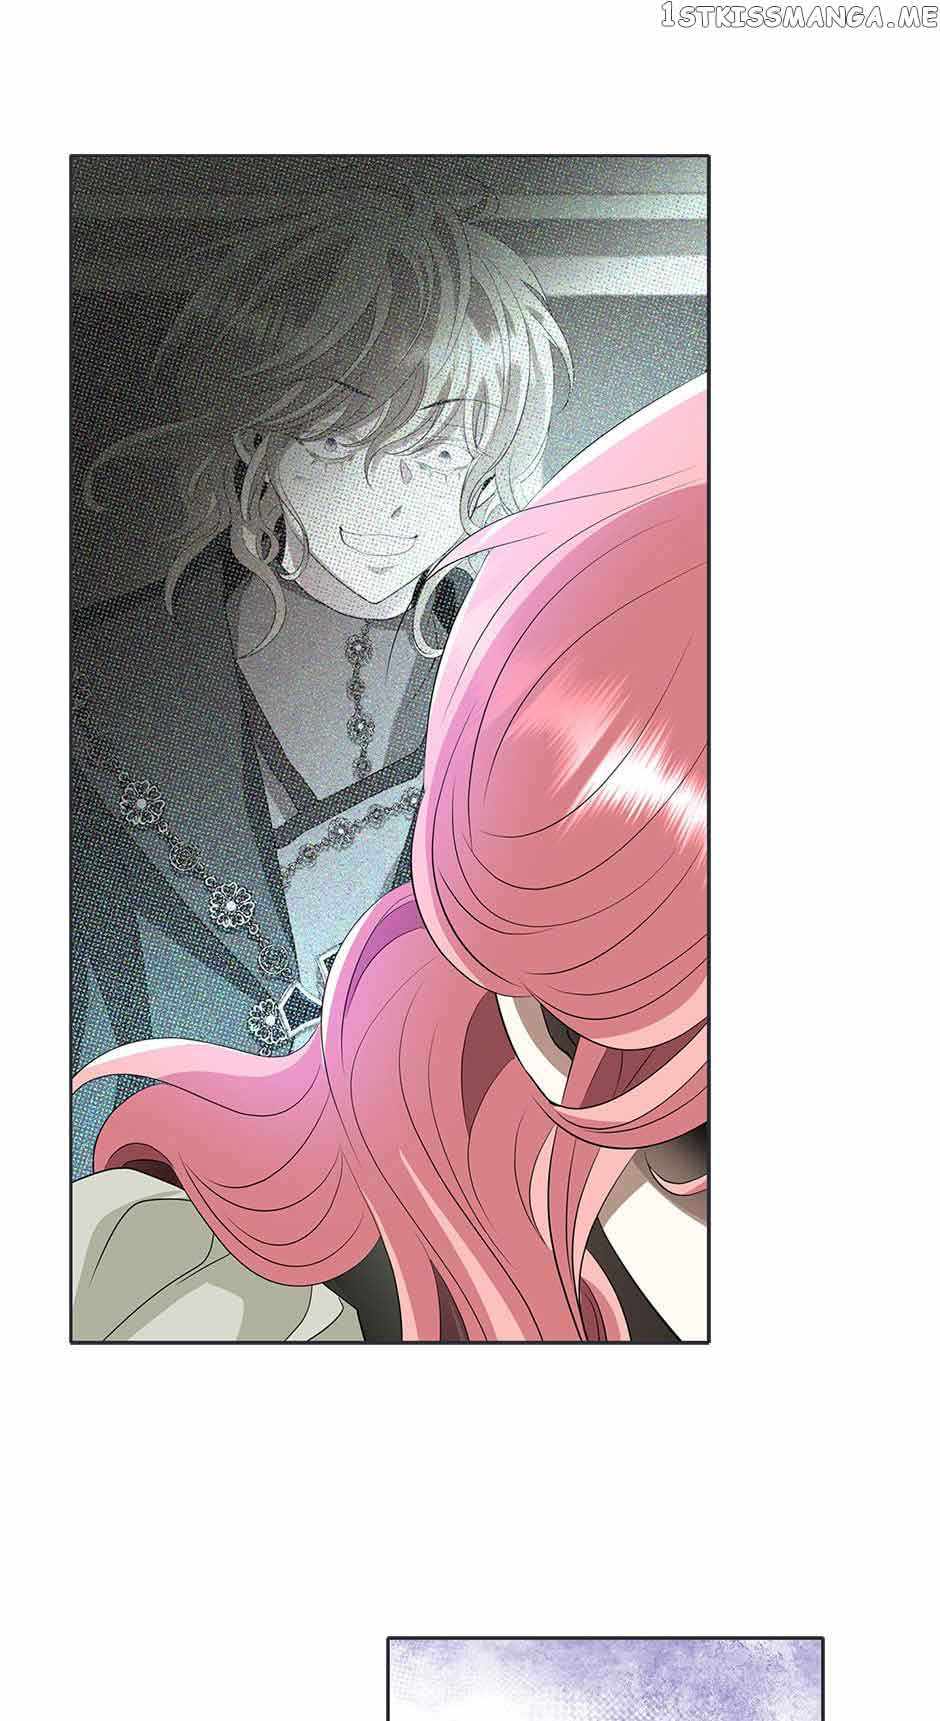 I’m a Killer but I’m Thinking of Living as a Princess Chapter 57-eng-li - Page 32